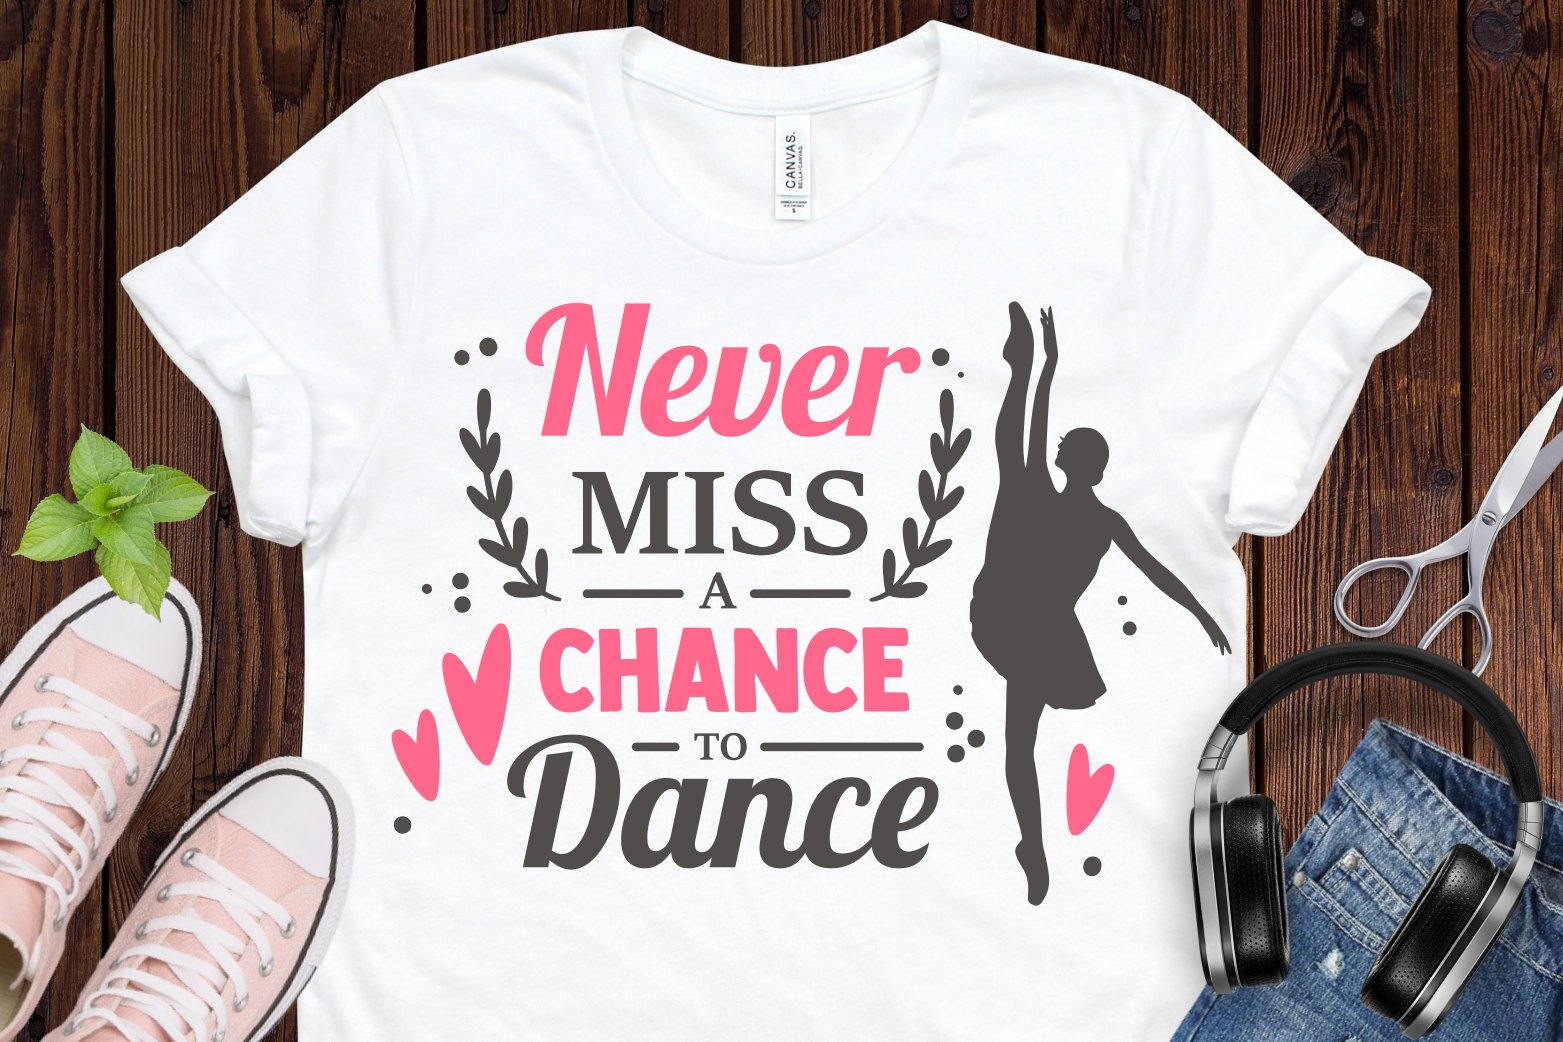 Never miss a chance to dance.